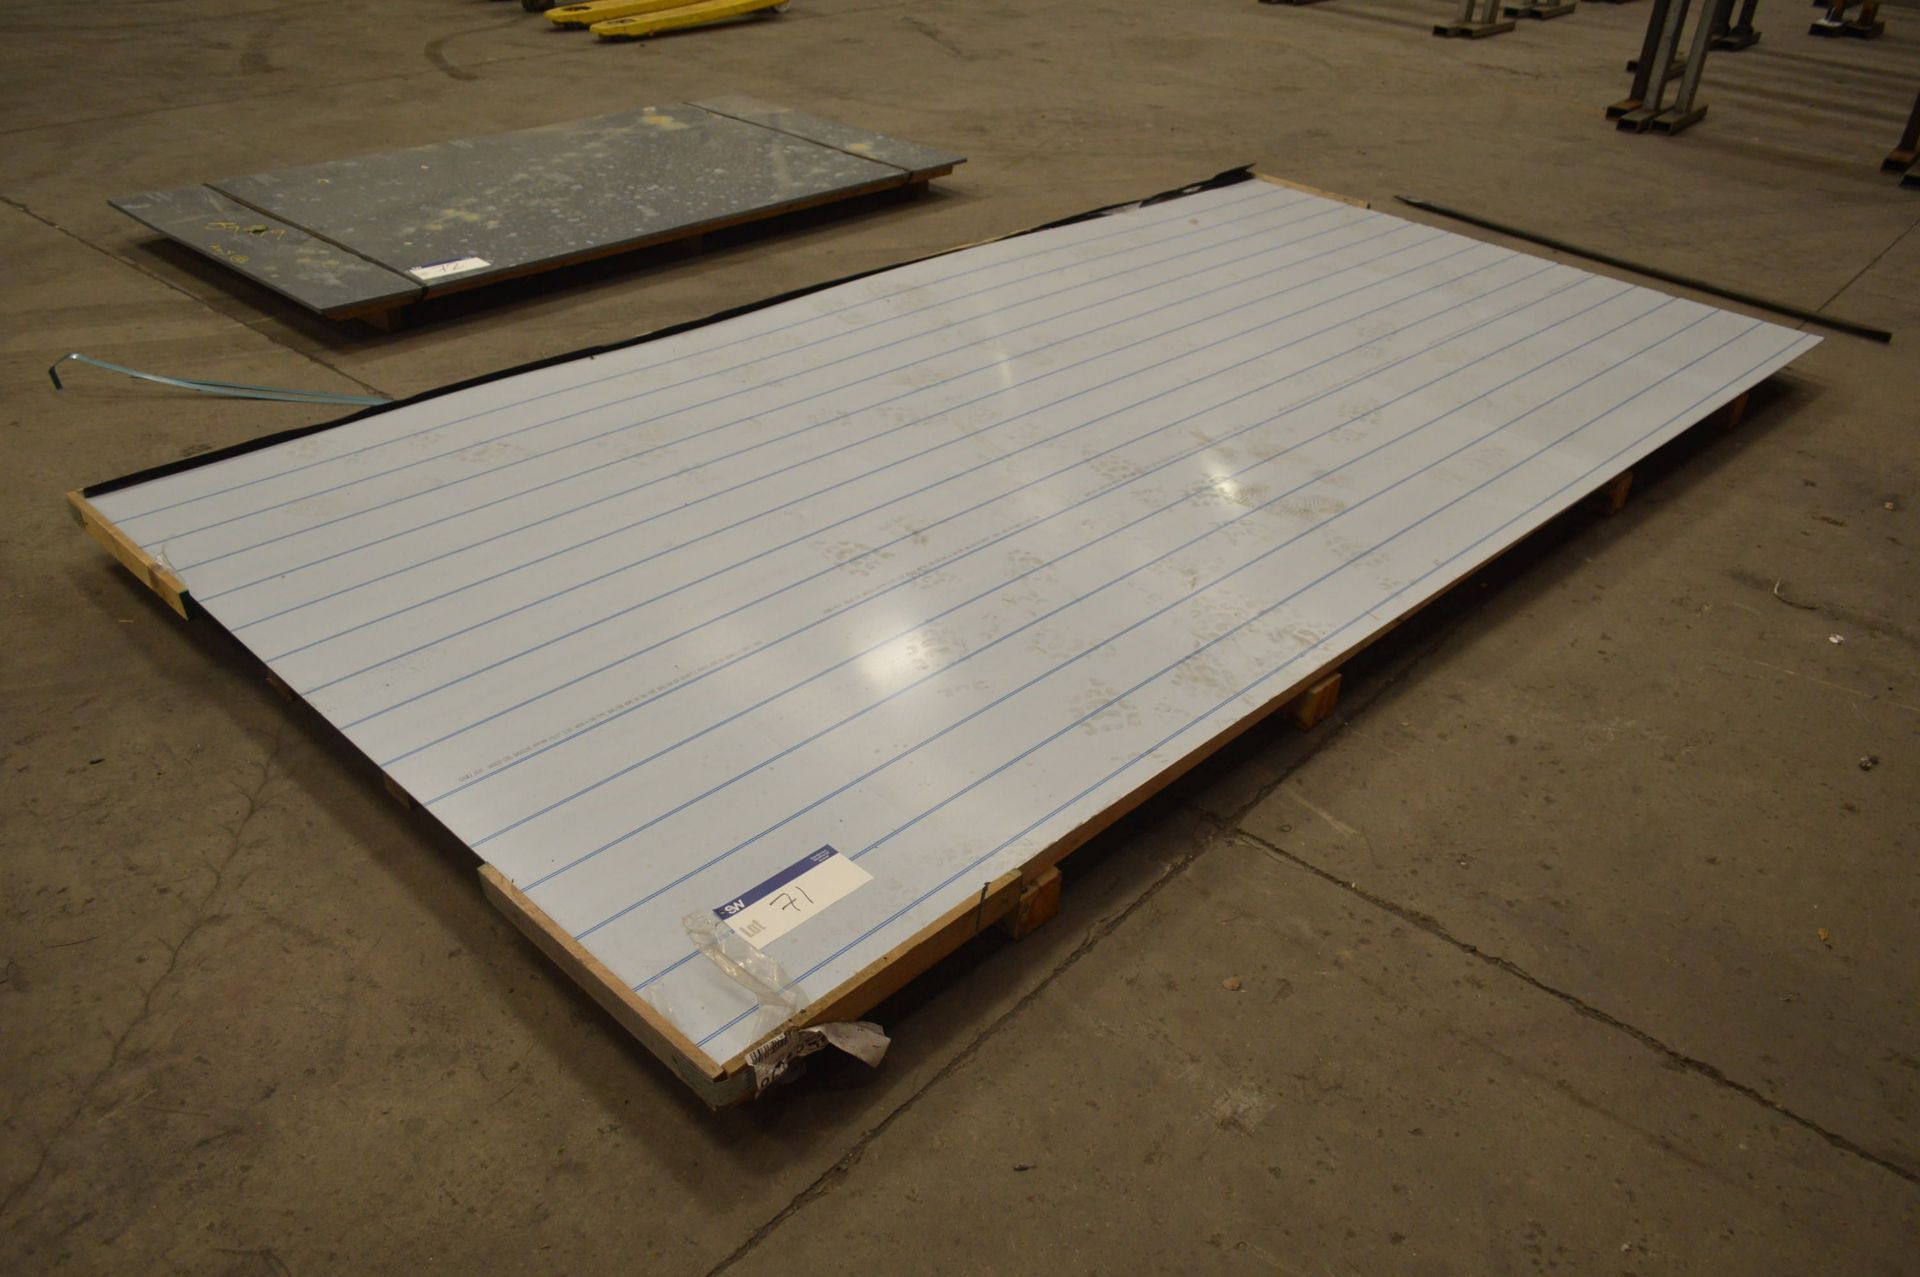 Stainless Steel Sheet, in one stack, each sheet approx. 4m x 2m x 3mm deep